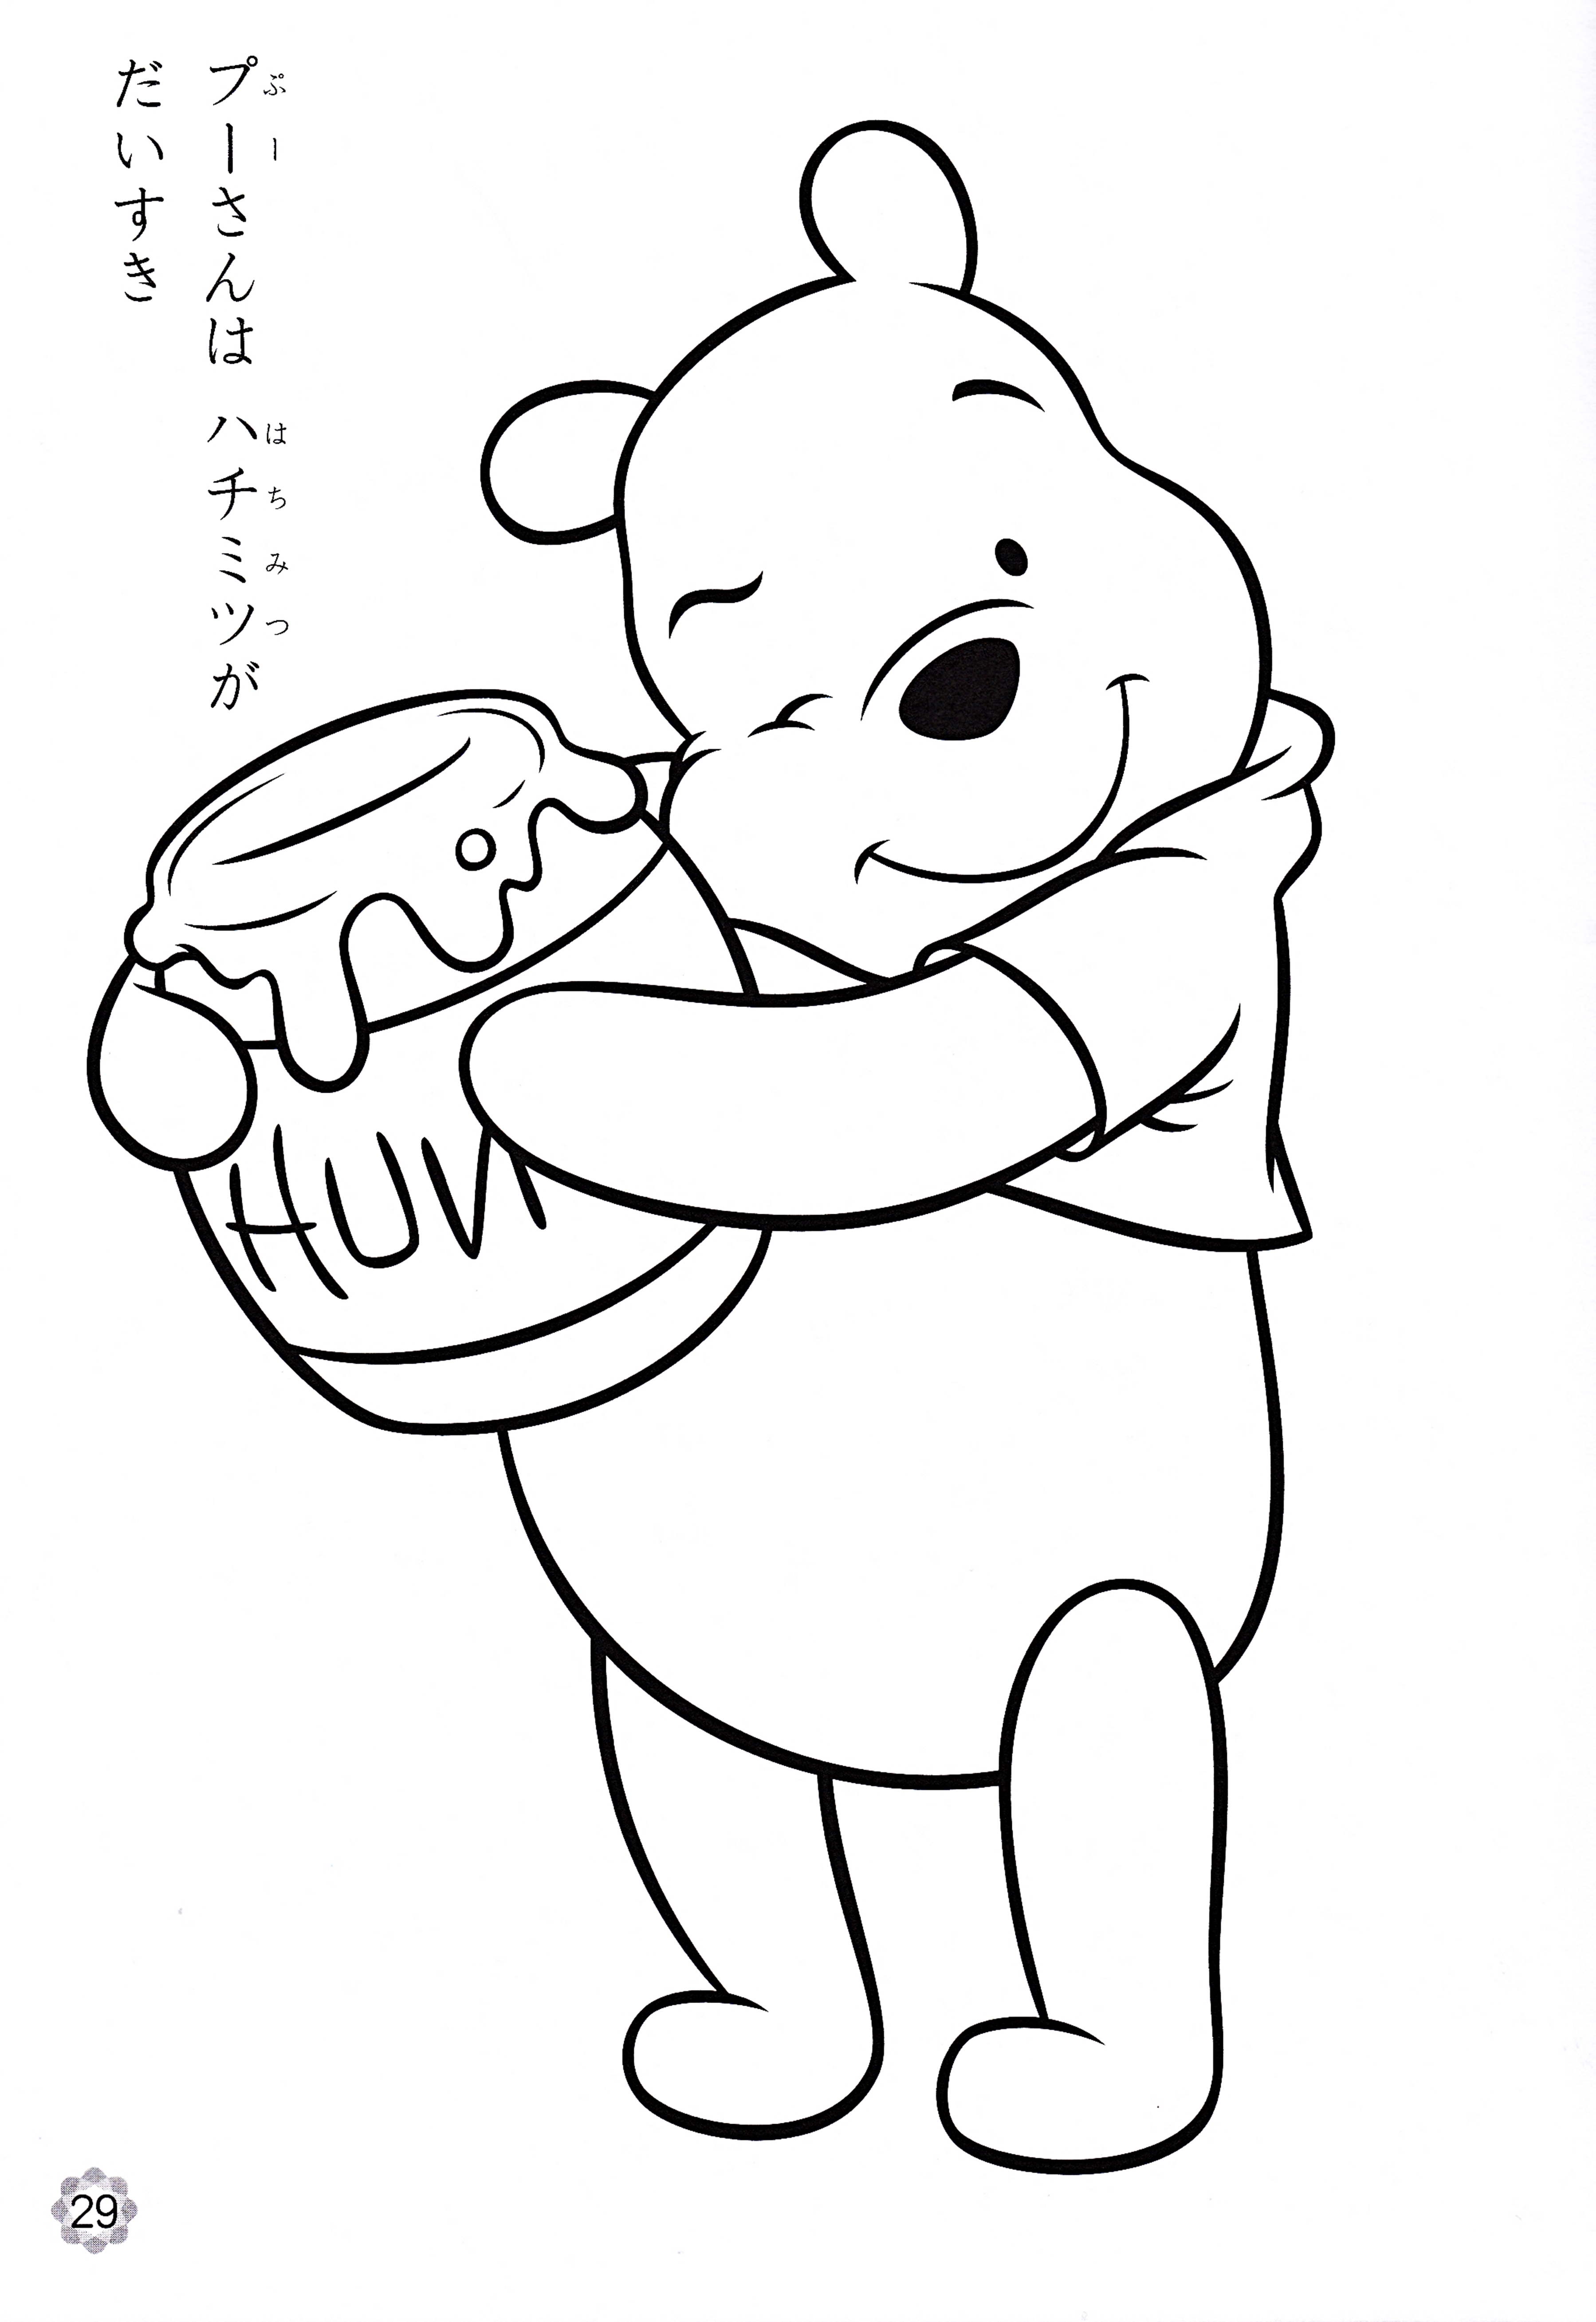  Walt disney Coloring Pages - Winnie the Pooh